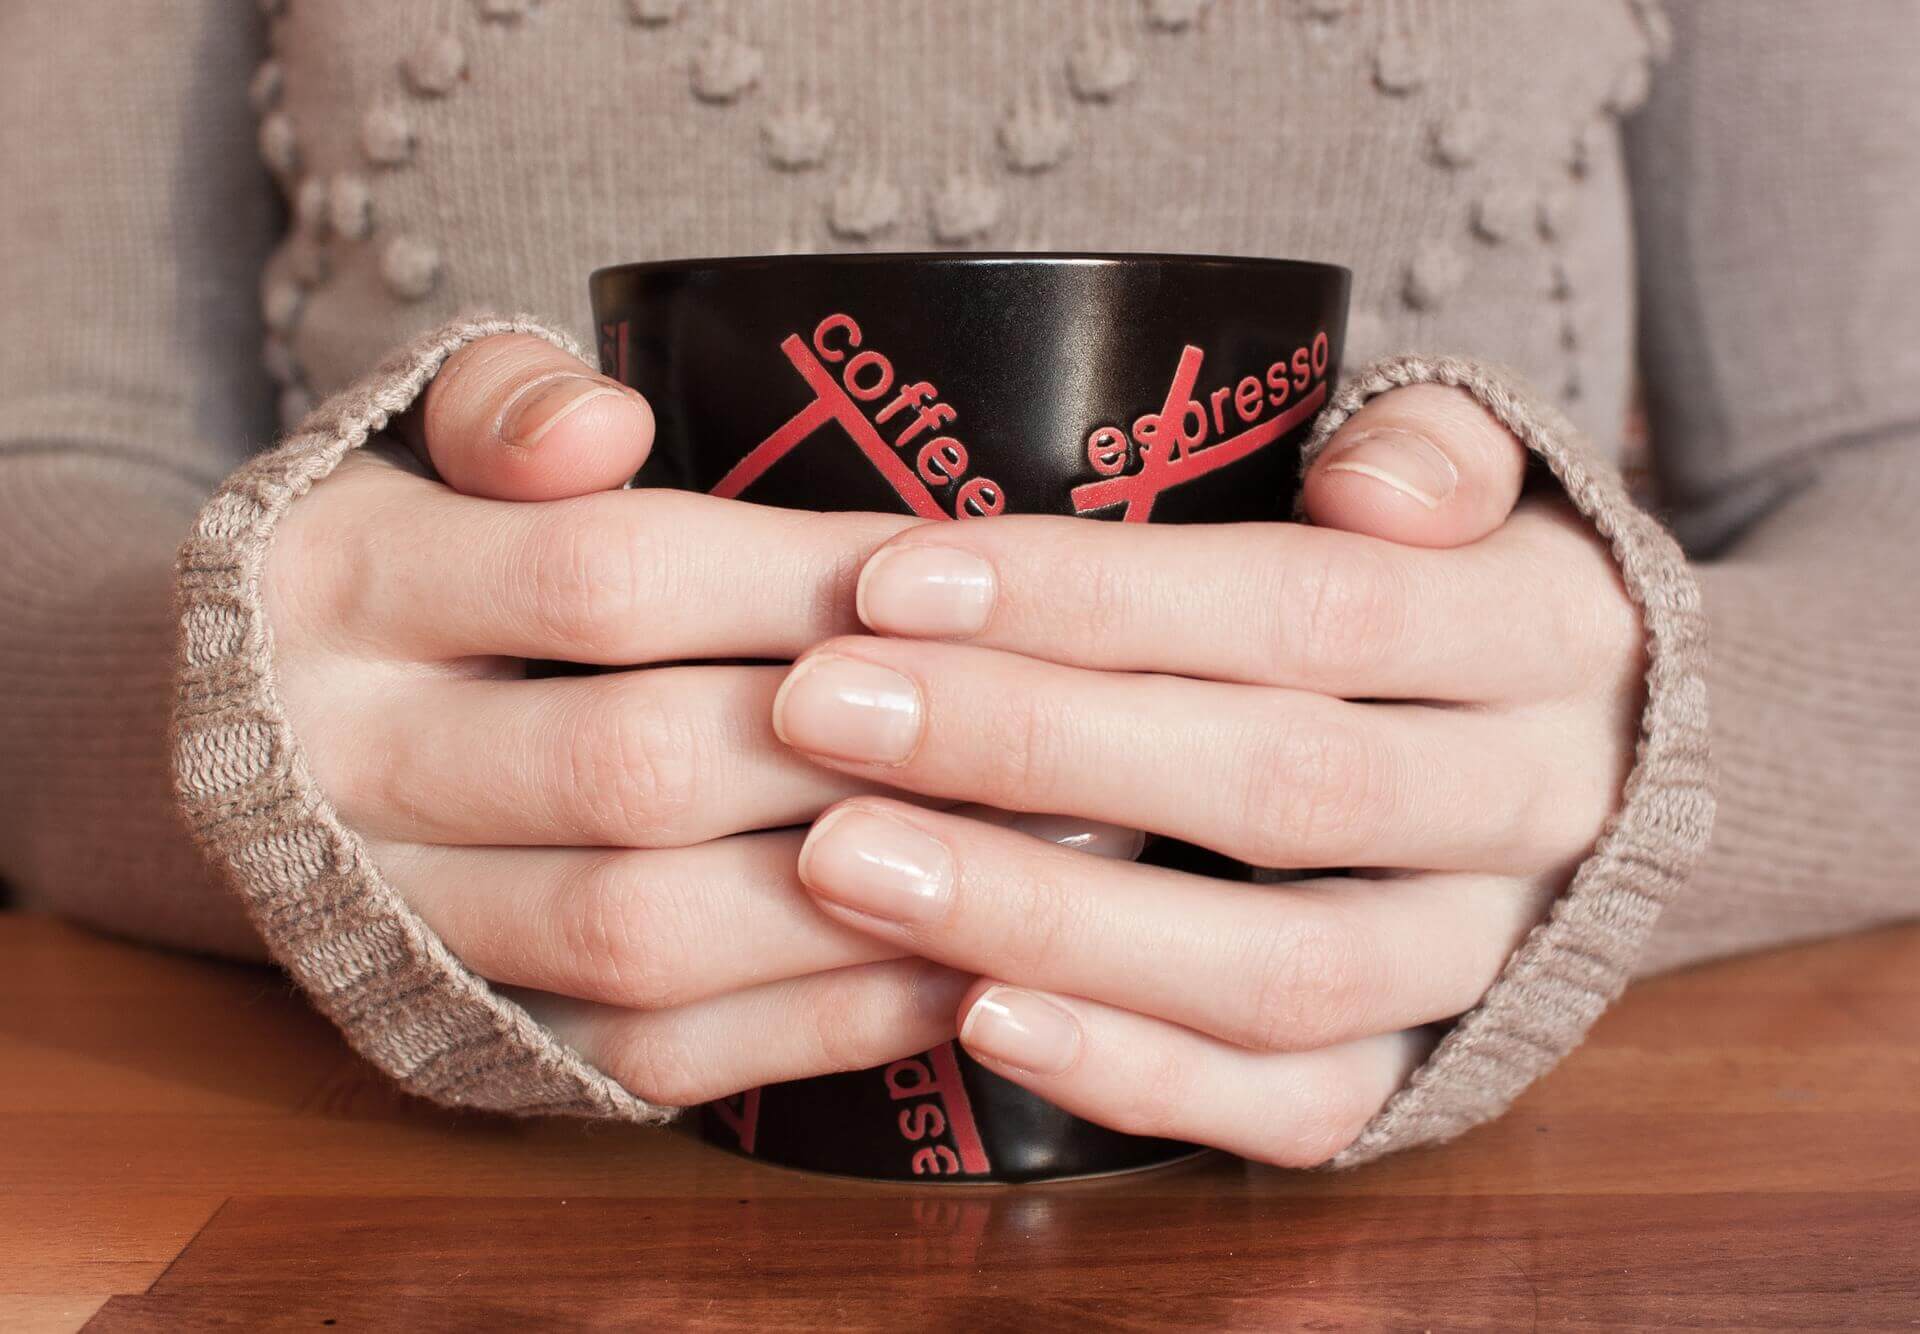 You're holding that mug wrong -- physicist calculates 'claw-hand posture'  is most effective to avoid coffee spills